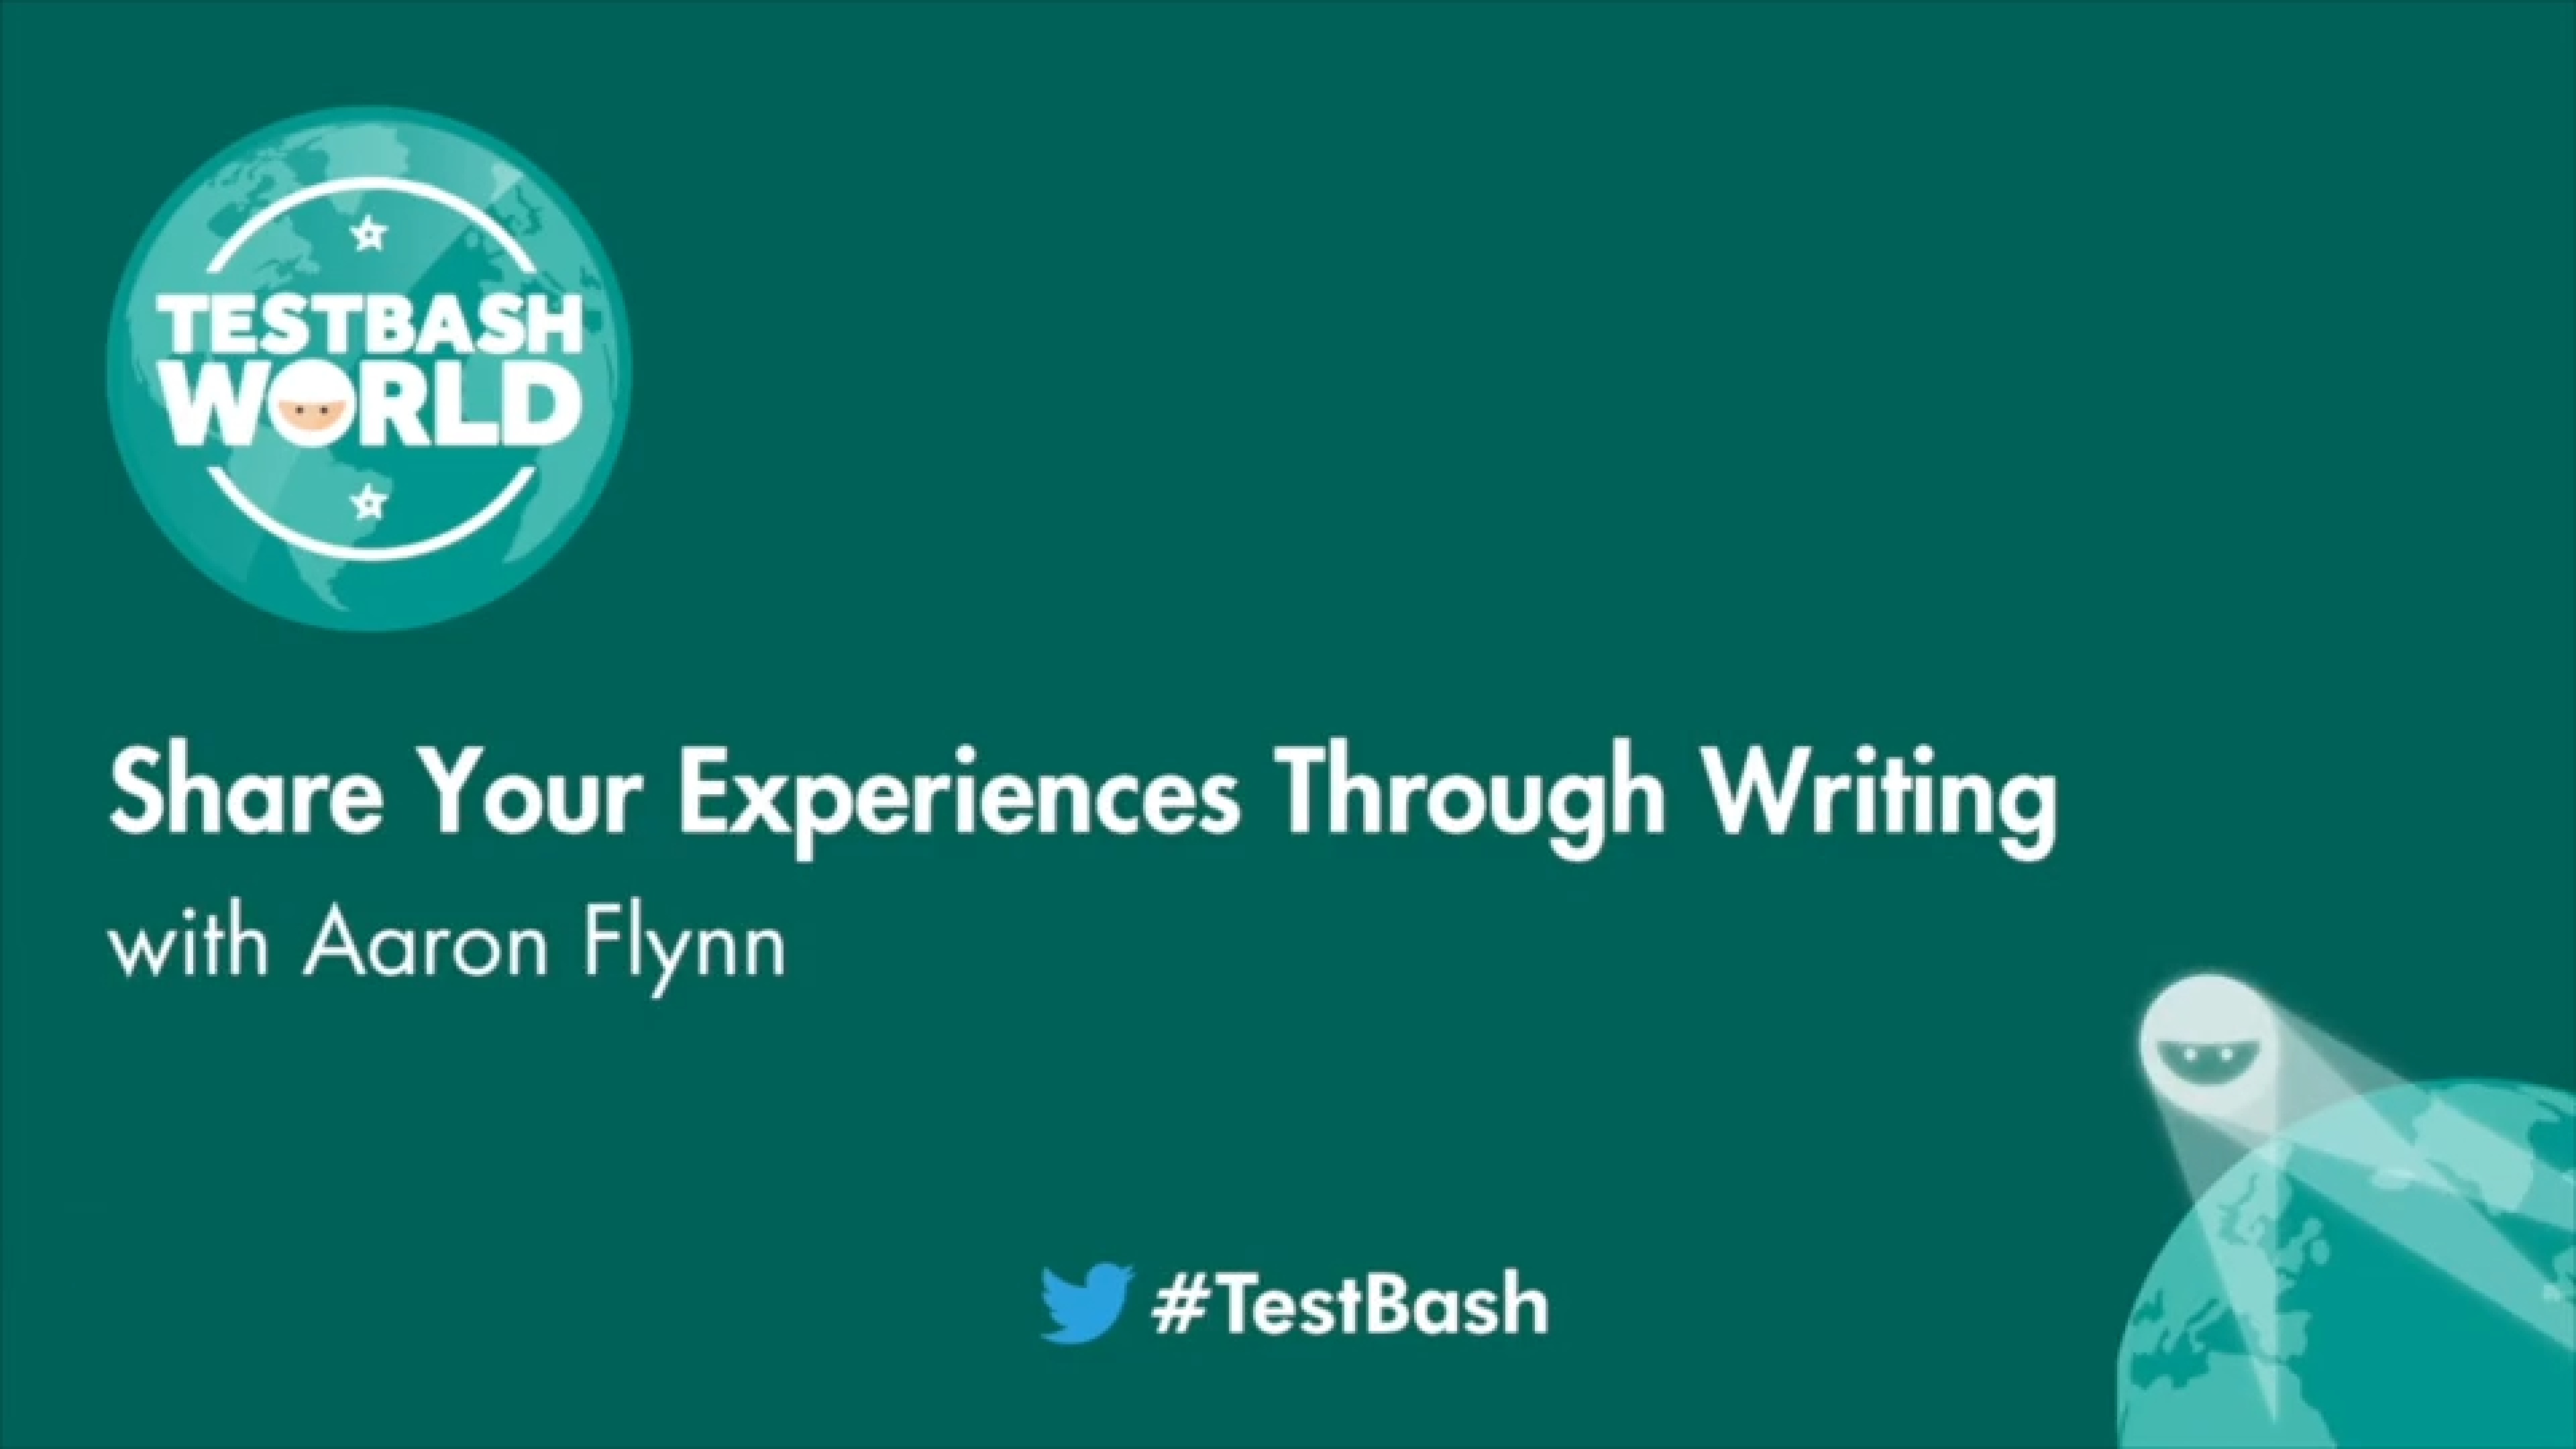 Share Your Experiences Through Writing - Aaron Flynn